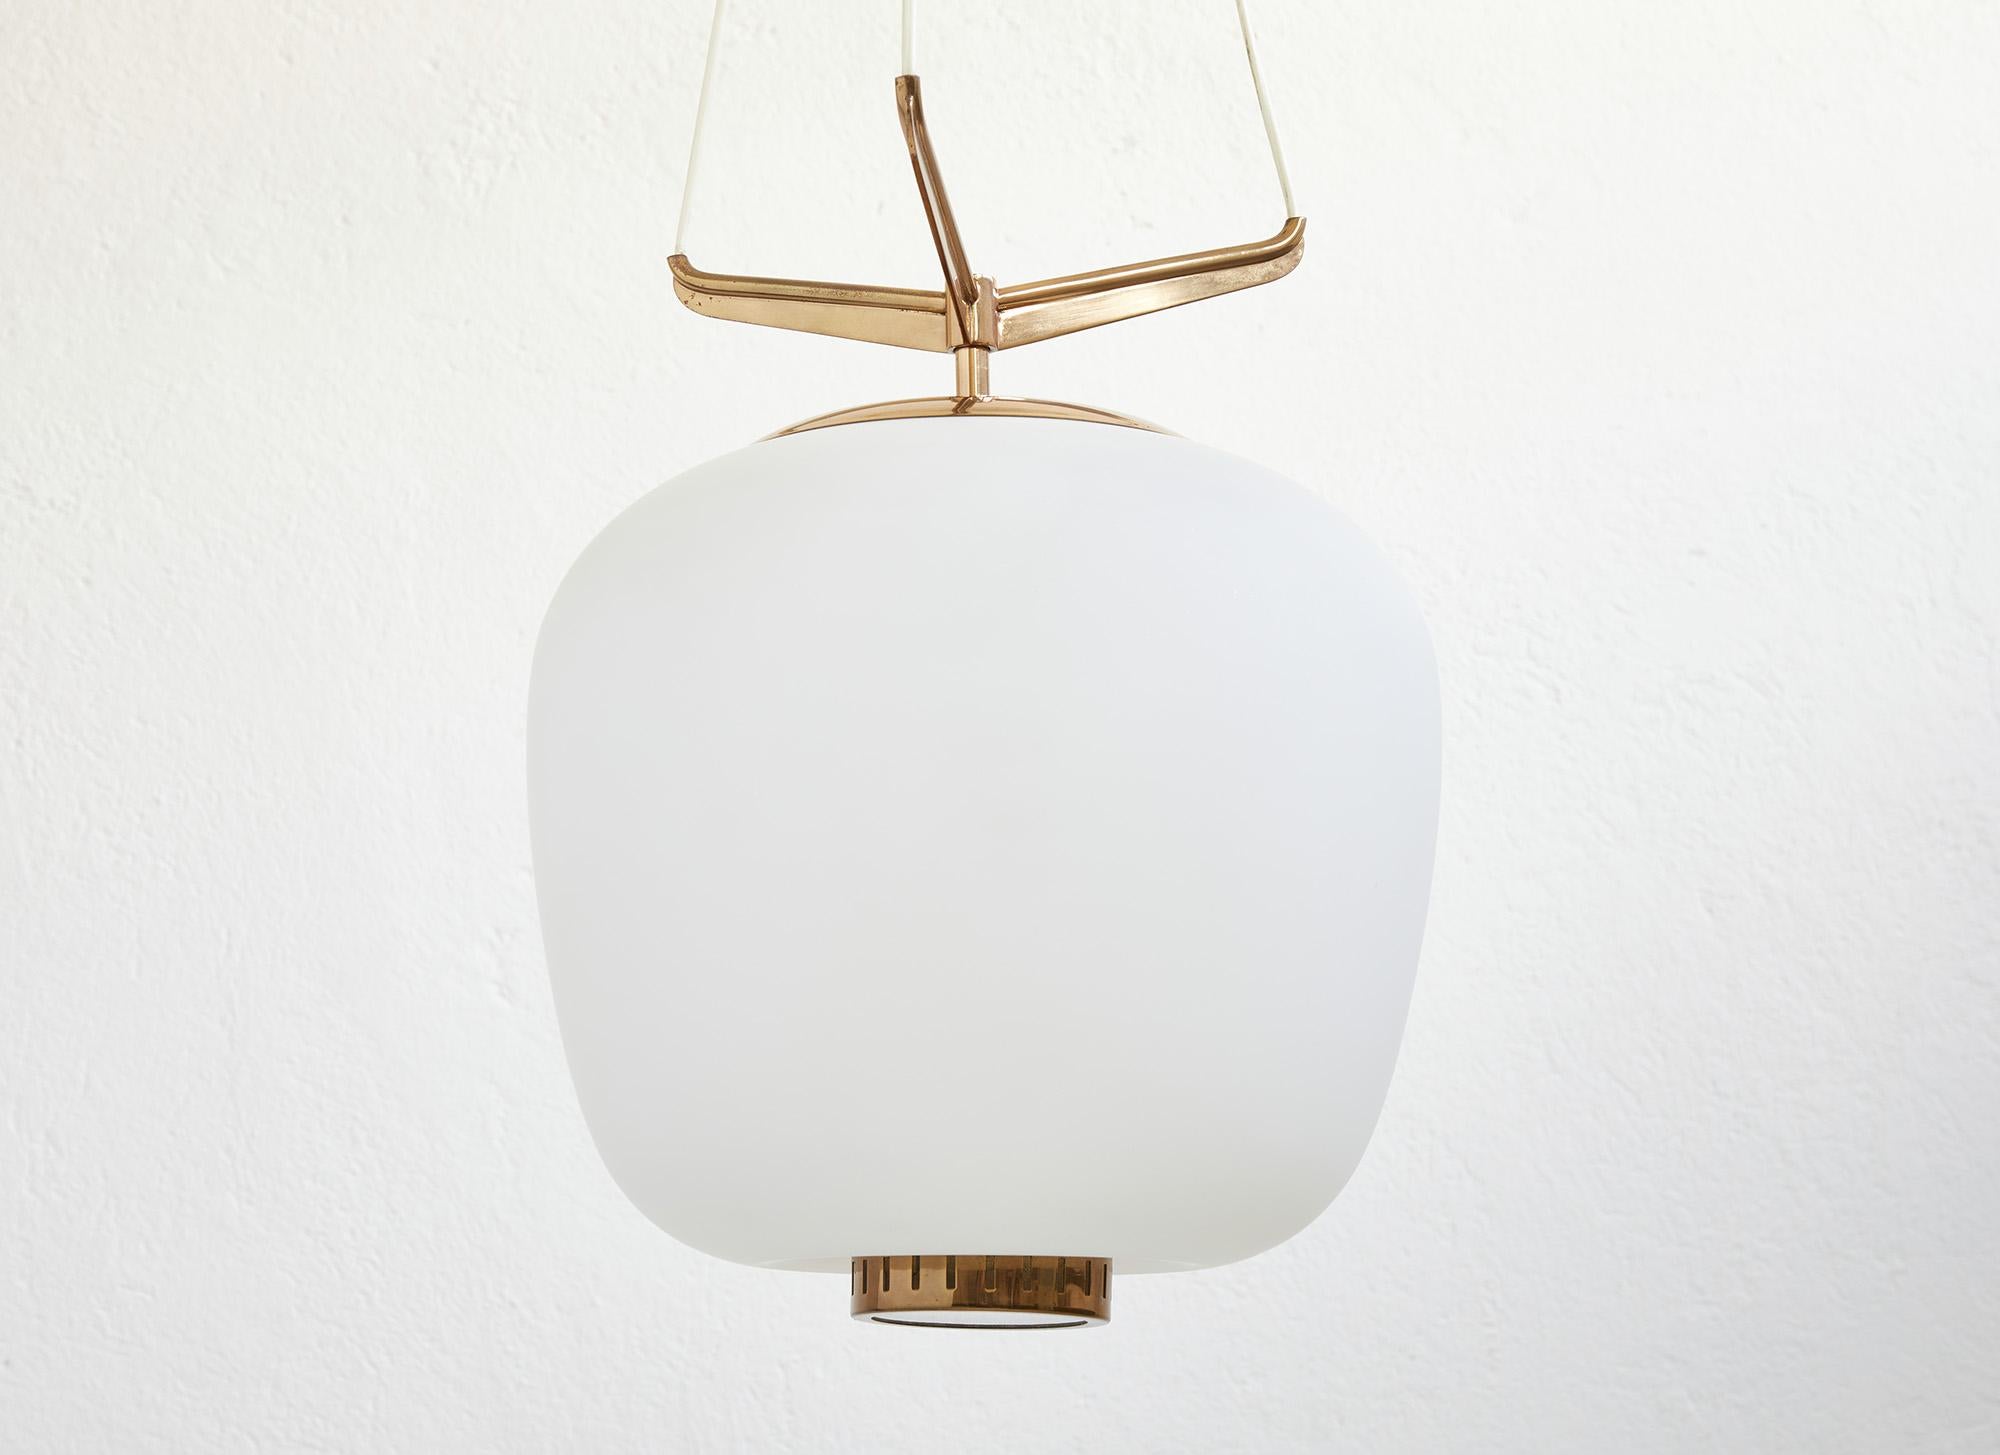 Mid-century modern Italian chandelier designed and produced by Stilnovo, Italy around 1950.

The gorgeous oval-shaped opaline glass shade produces a soft ethereal glow, delicately suspended by a sculptural frame of polished brass designed with